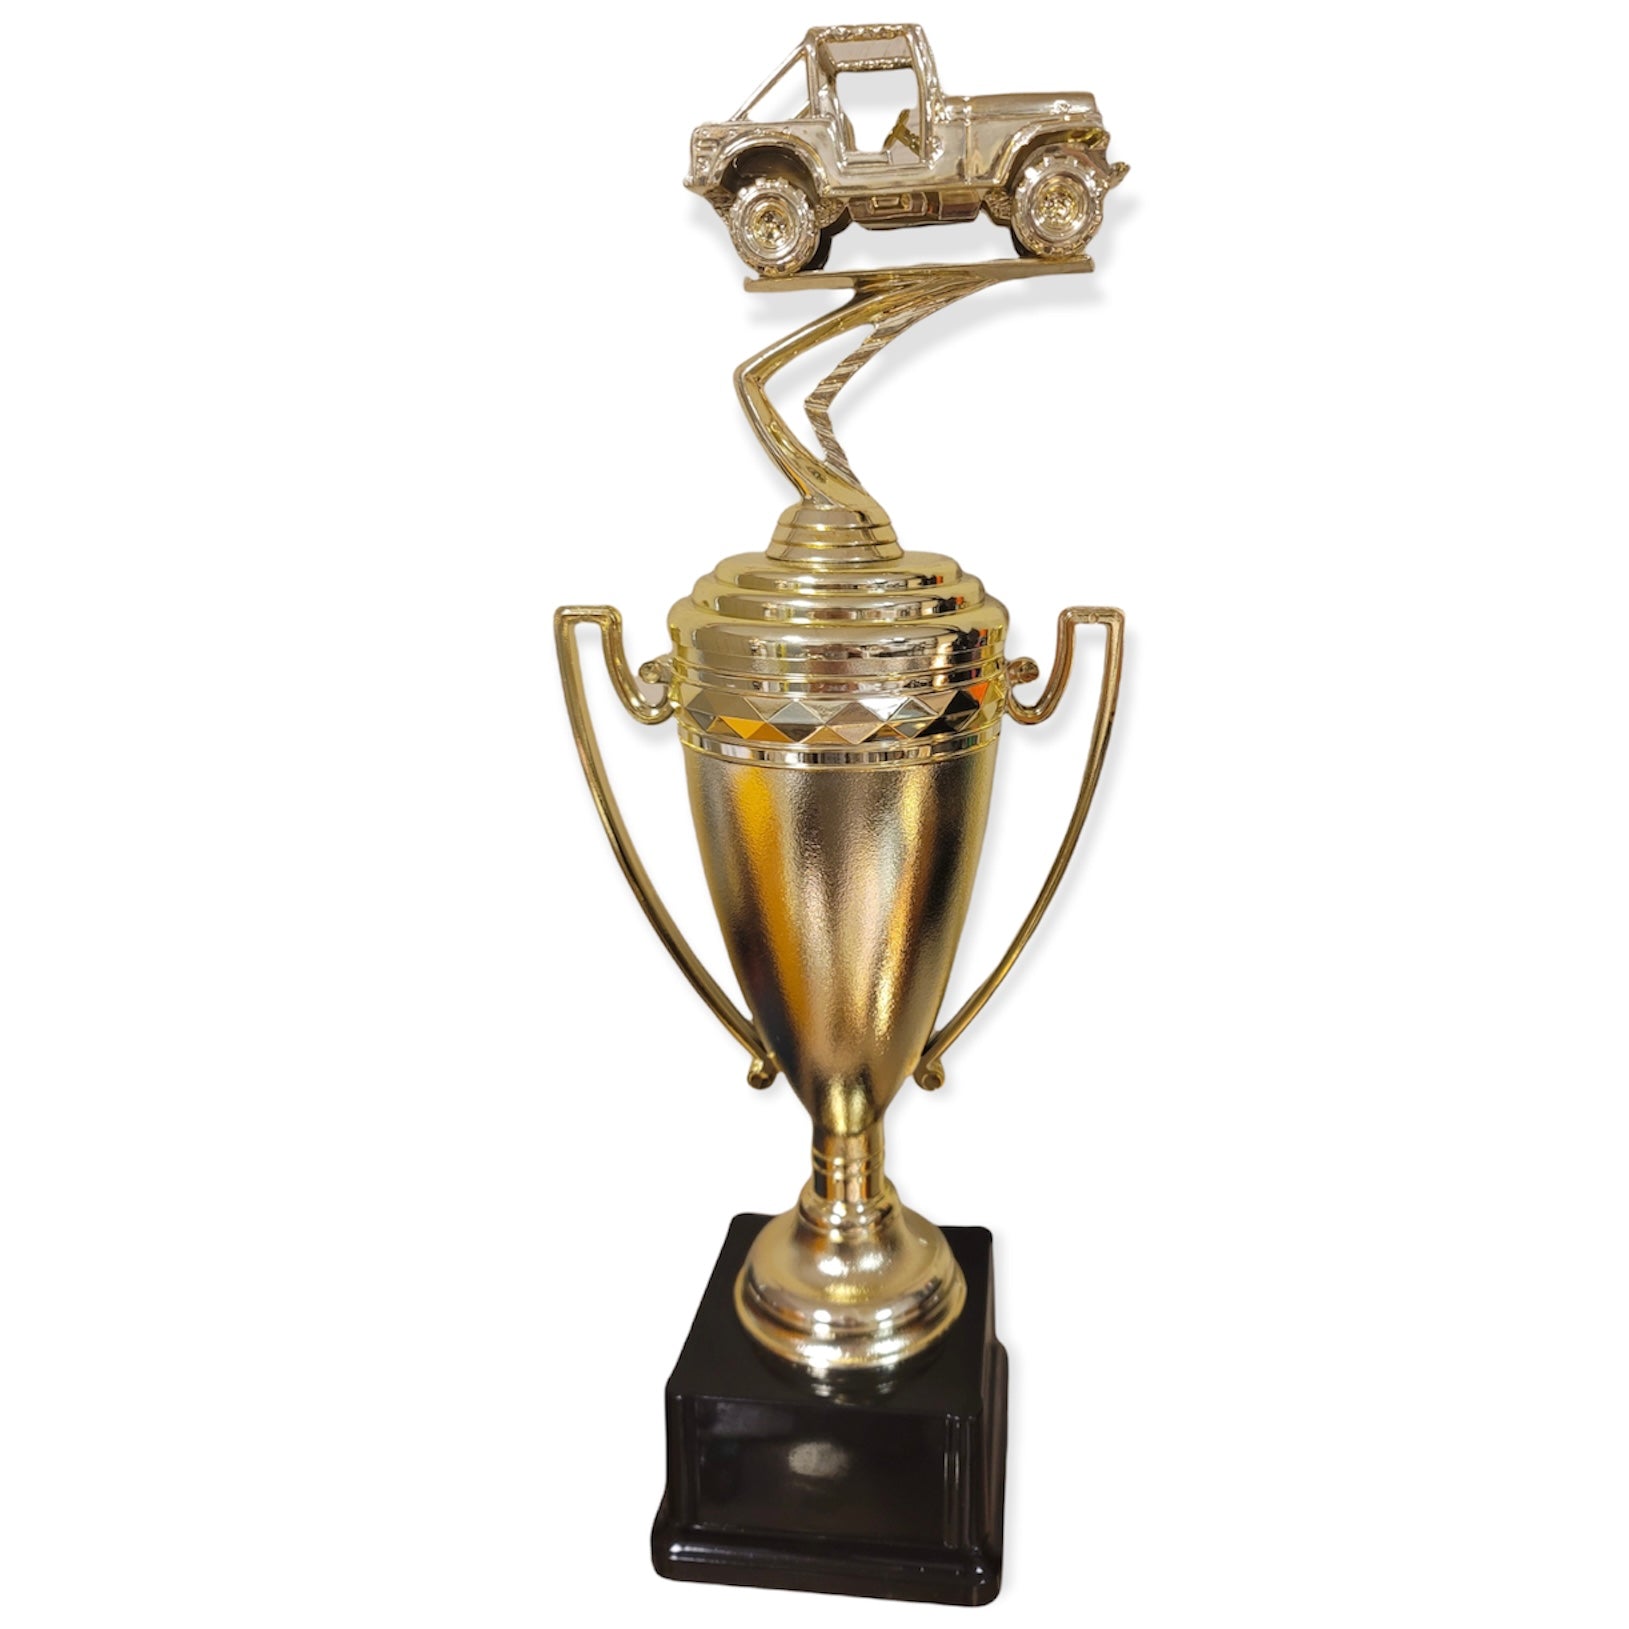 jeep trophy with free engraved plate